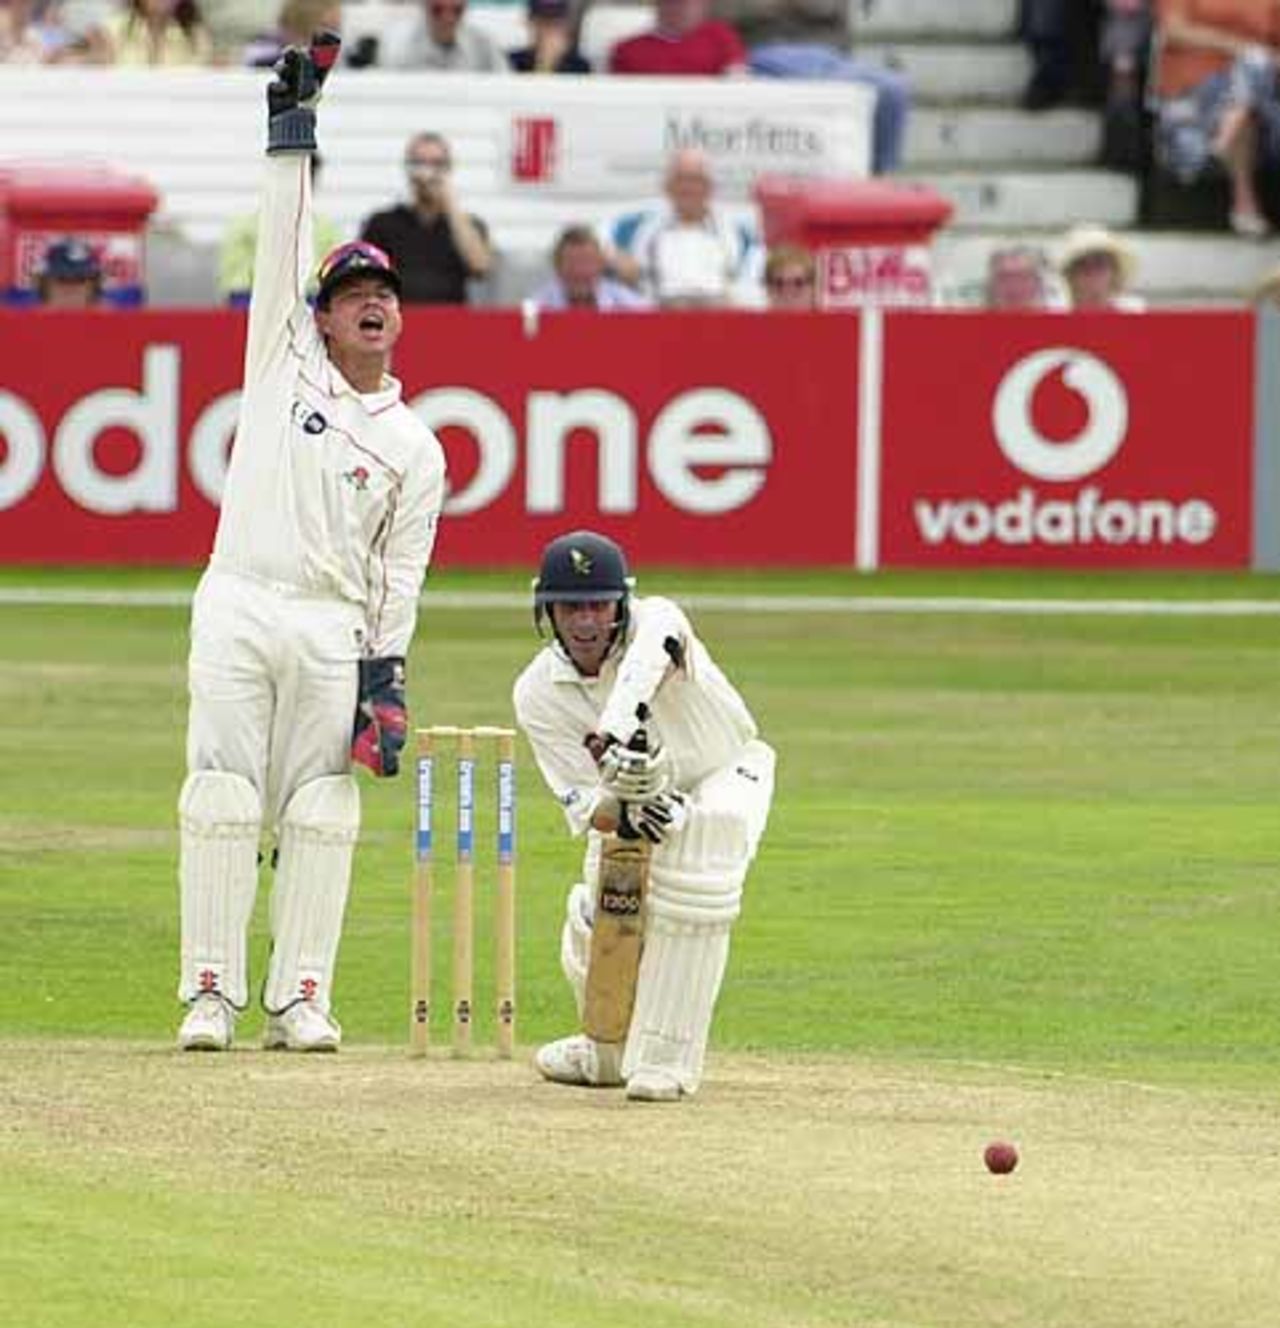 Warren Hegg wants the wicket of Wood , but not out this time, CricInfo Championship, 2nd Day, 29 July 2001